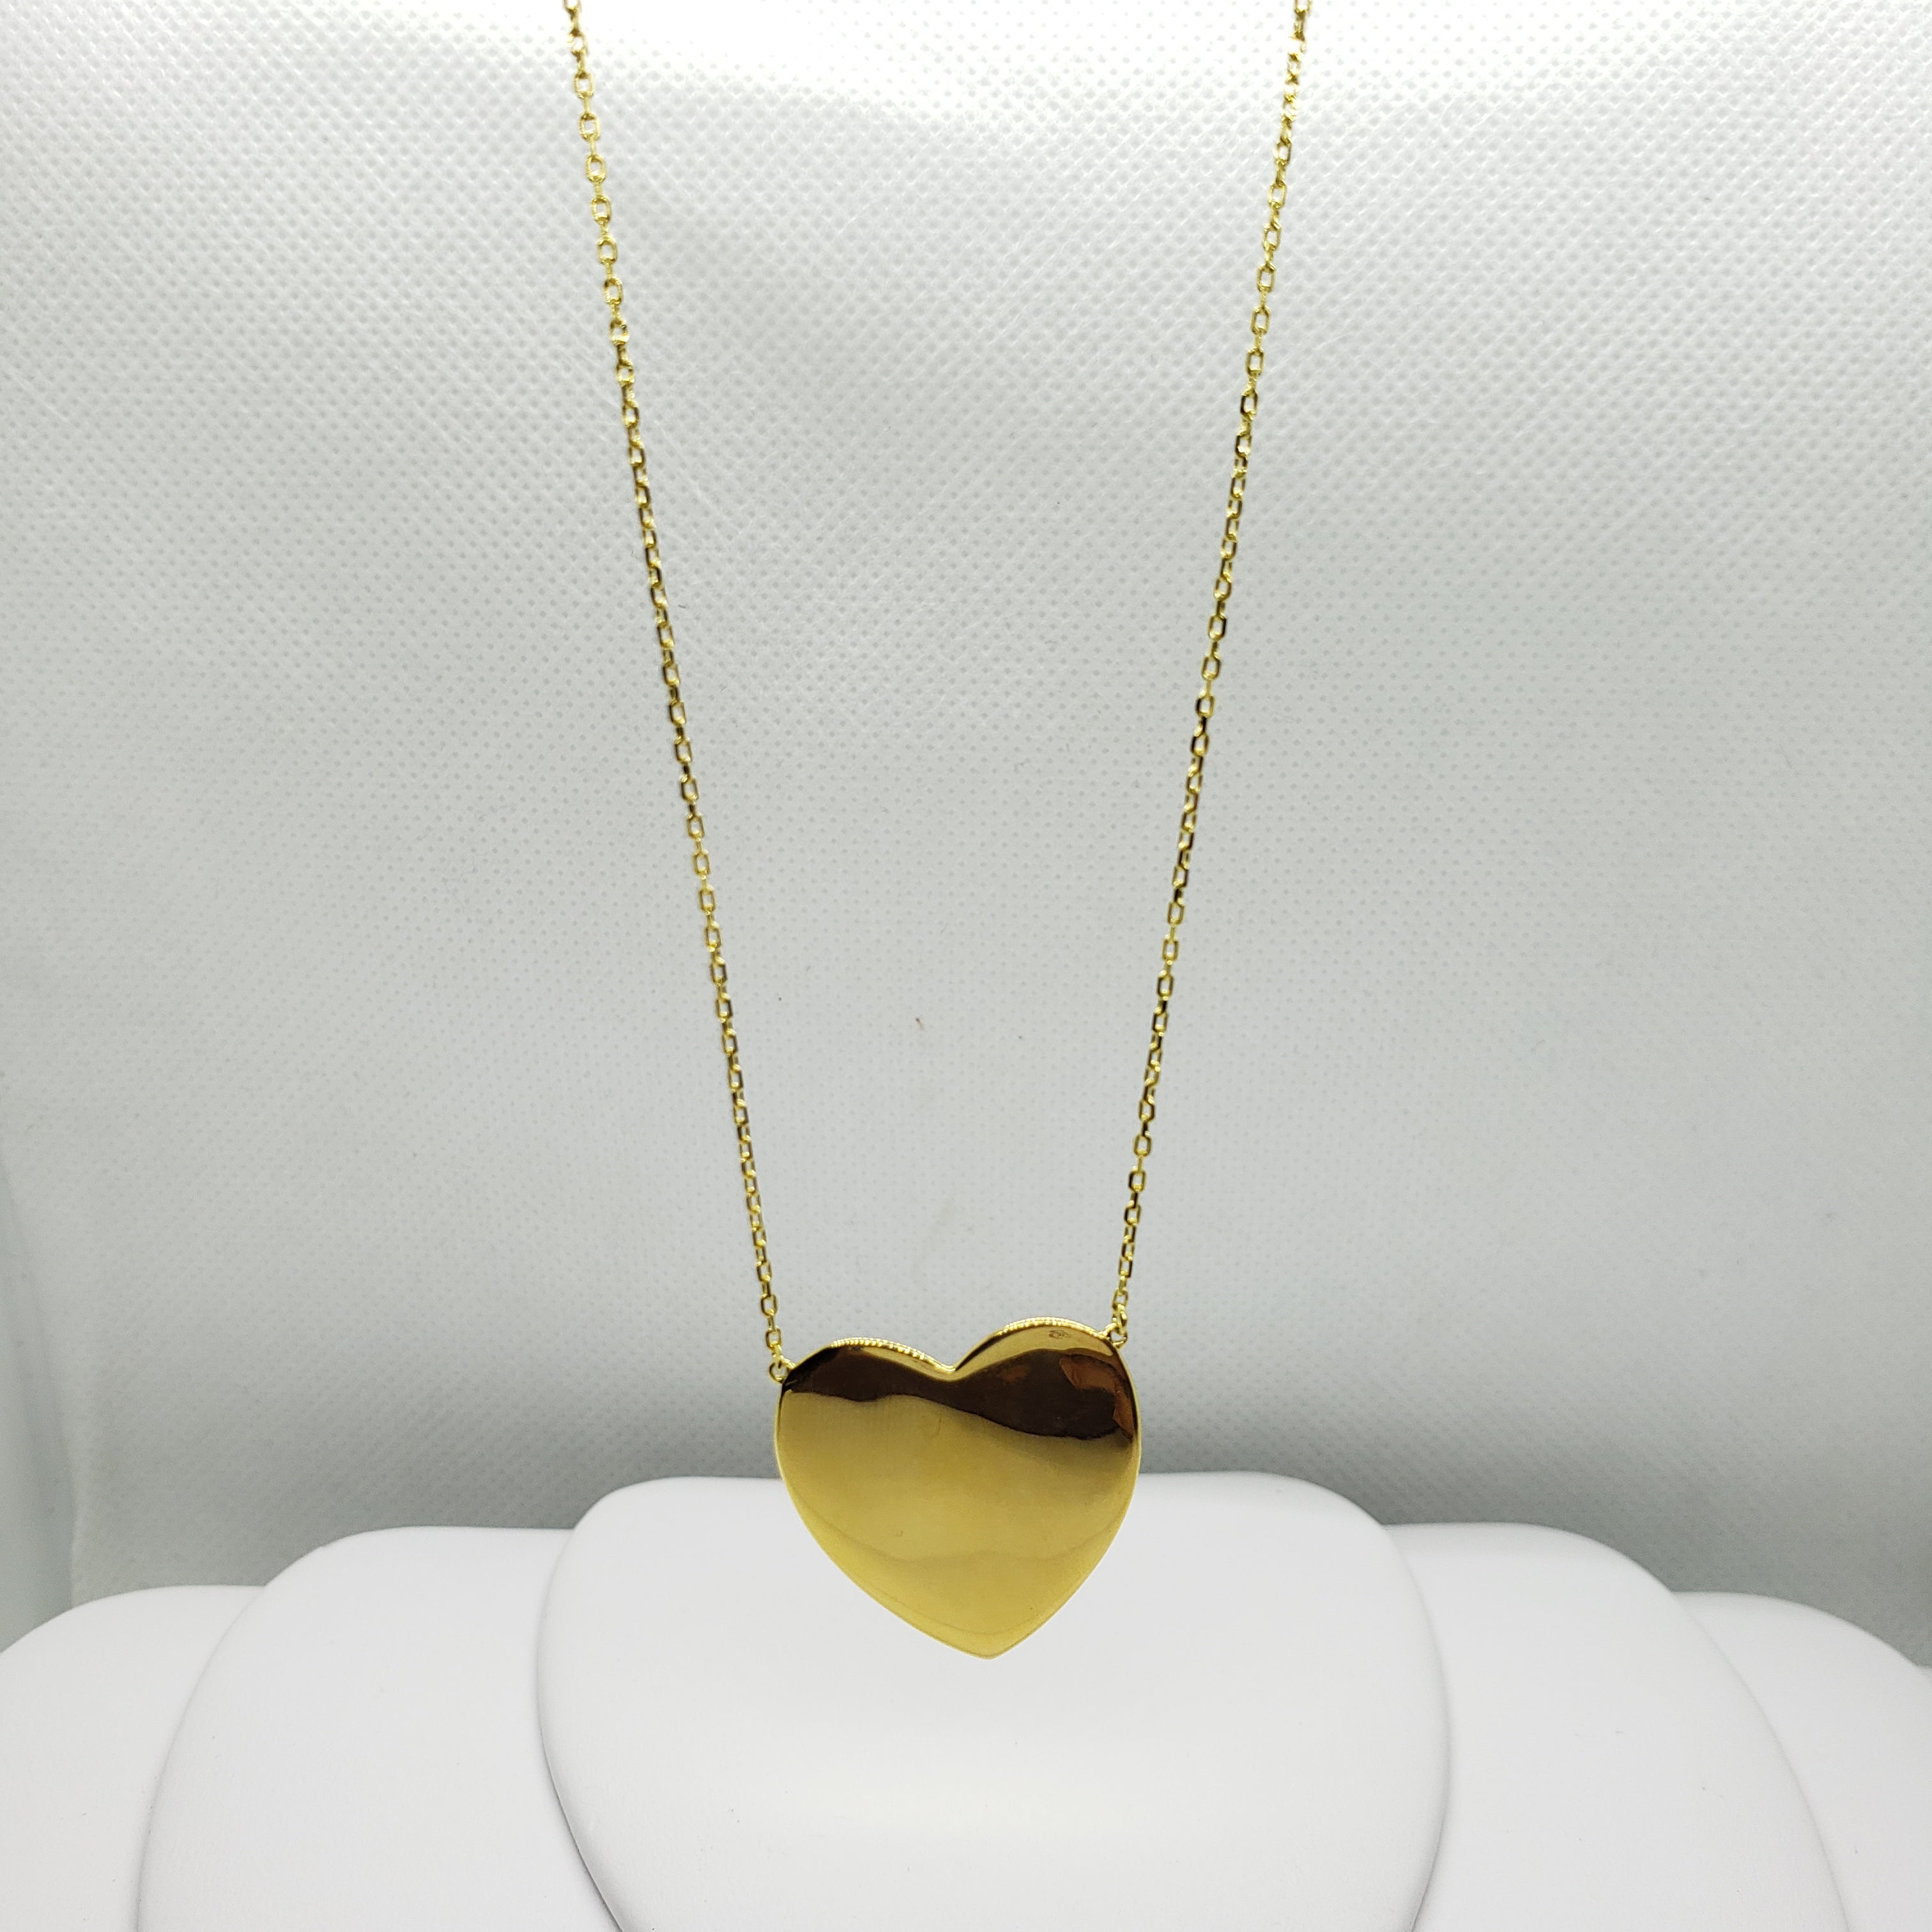 Necklace 004